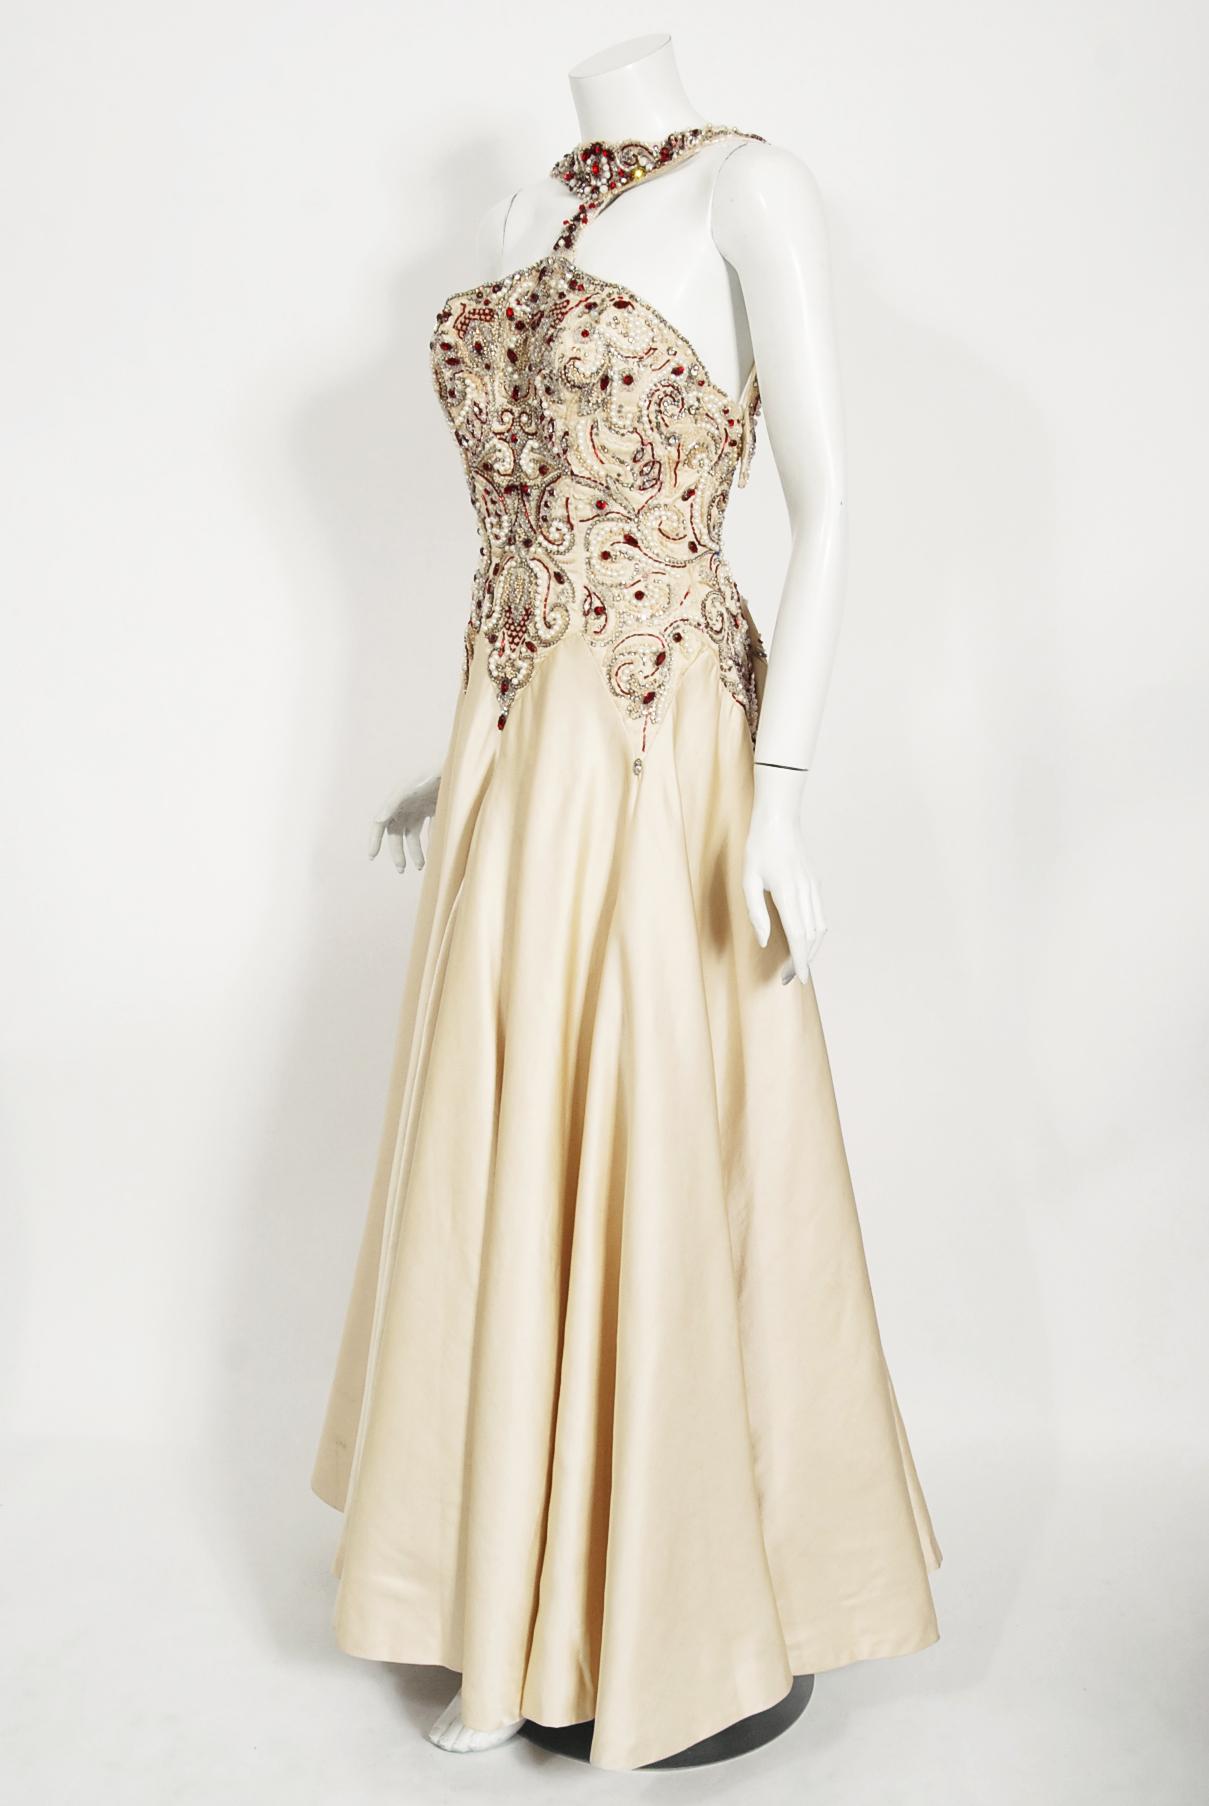 Women's Iconic 1996 Madonna 'Evita' Film-Worn Beaded Ivory Silk Couture Archival Gown For Sale